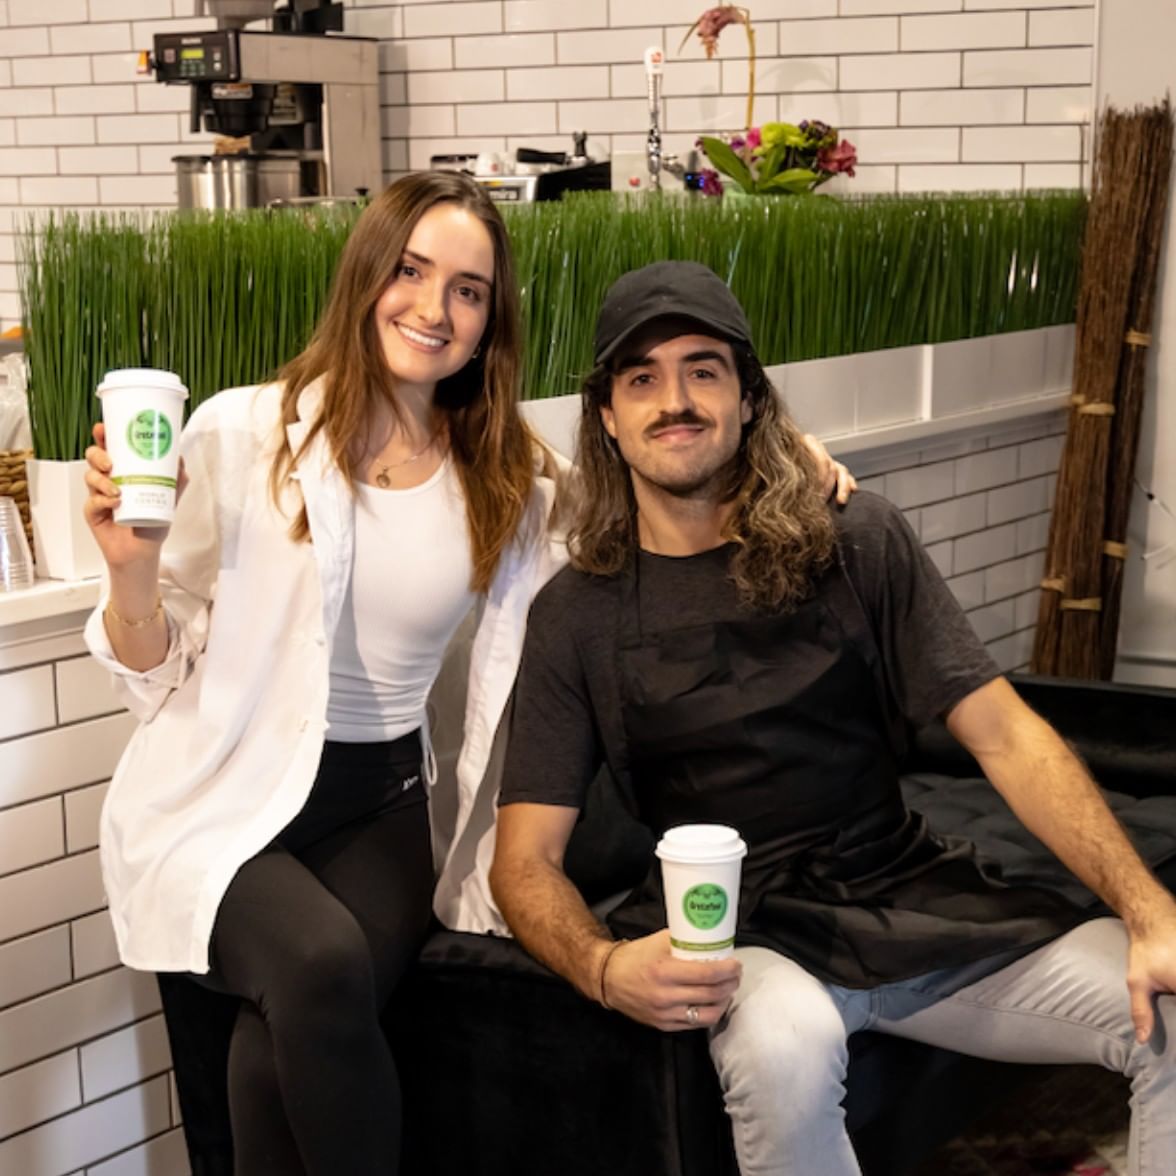 Welcome to Gratefuel Cafe – where every bite is a step toward a healthier, happier you, and where good food and good vibes go hand in hand!